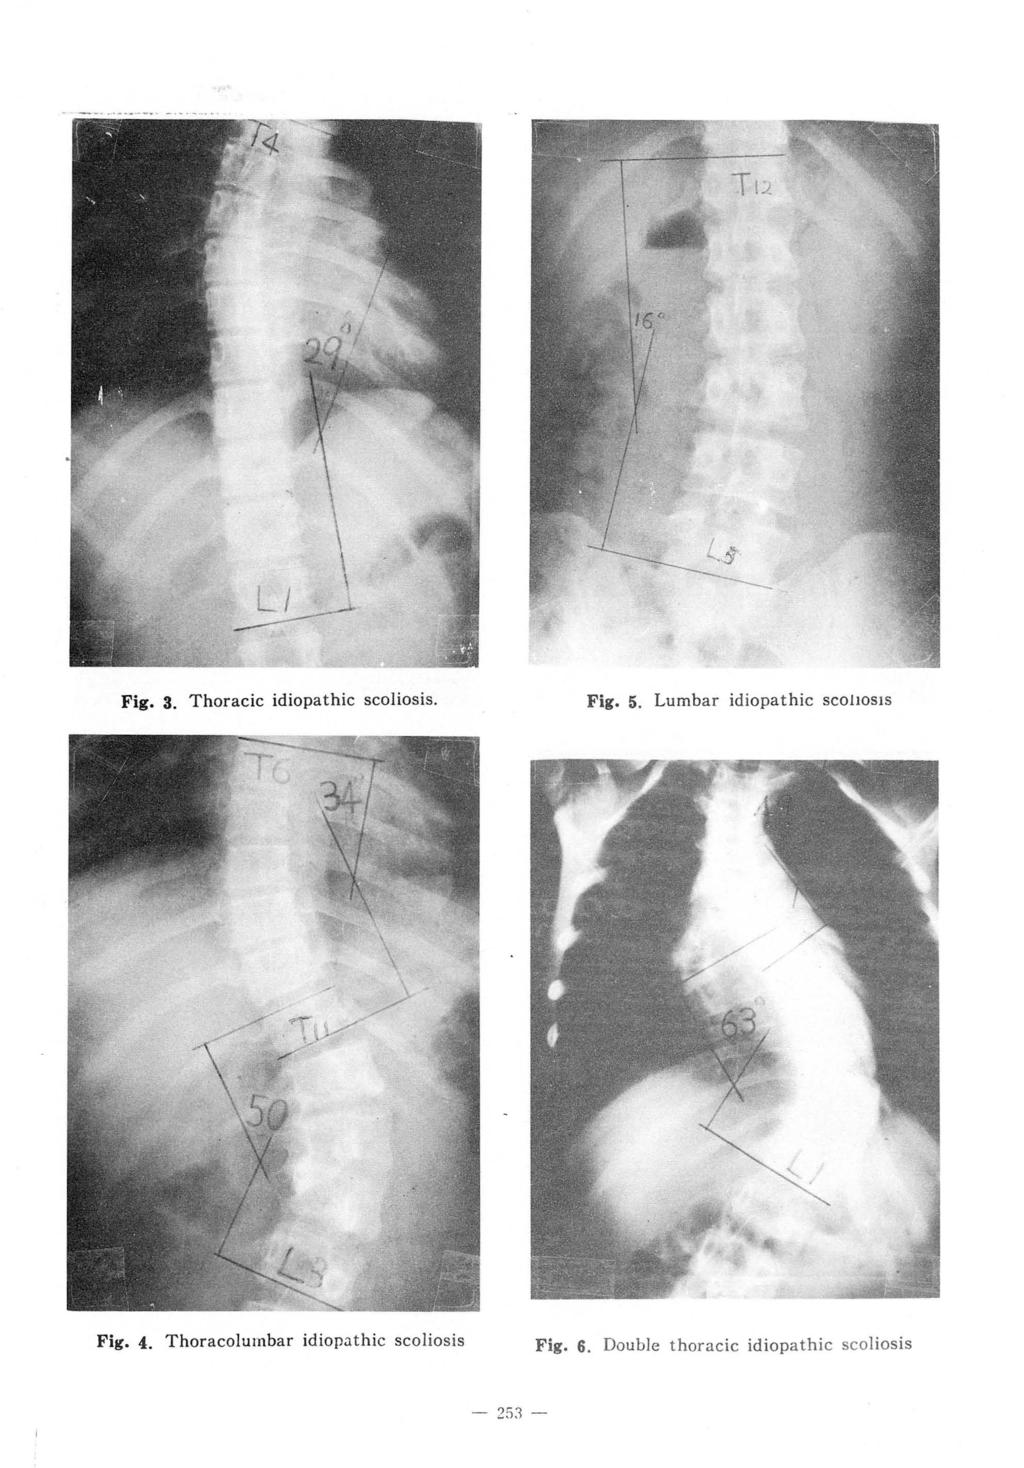 Fig. 3. Thoracic idiopathic scoliosis. Fig. 5. Lumbar idiopathic SCOl losis / x?